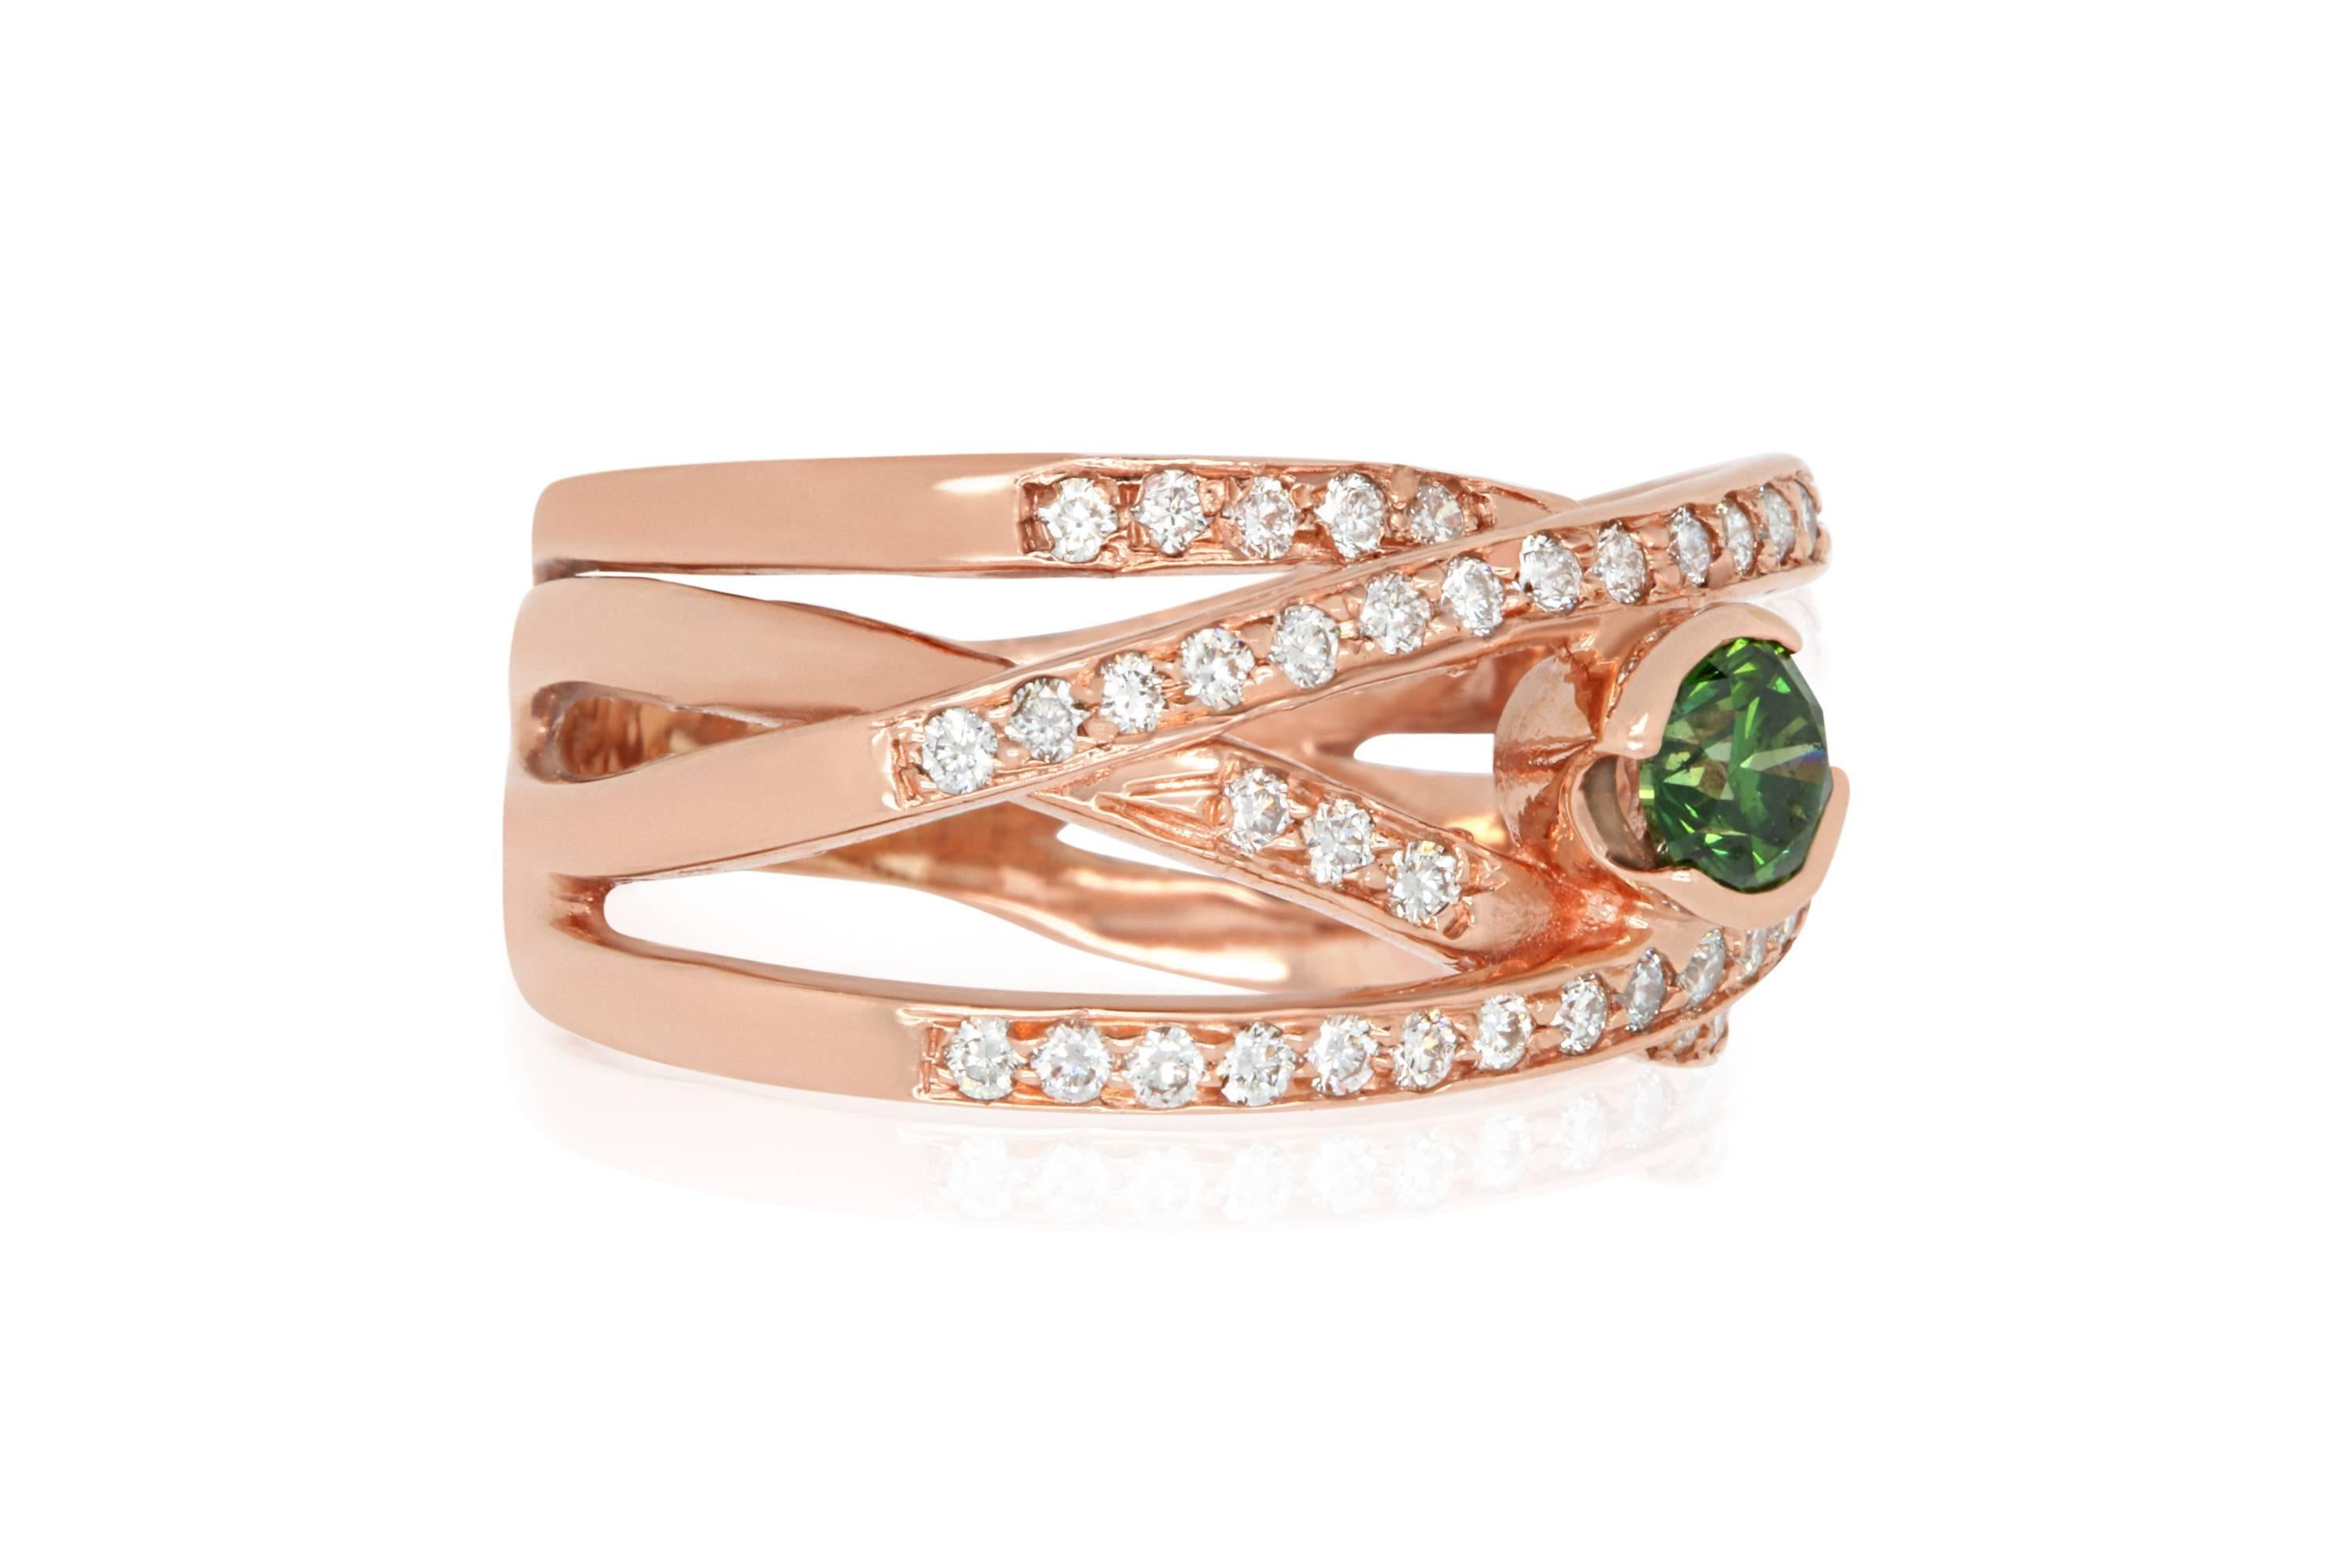 This beautiful piece features a simple round 0.49 carat Green Diamond set in Rose Gold and surrounded by our exquisite criss crossing bands of 0.65 carat White Diamonds 

Material: 14k Rose Gold
Gemstones: 1 Rounds shaped Green Diamond at 0.49